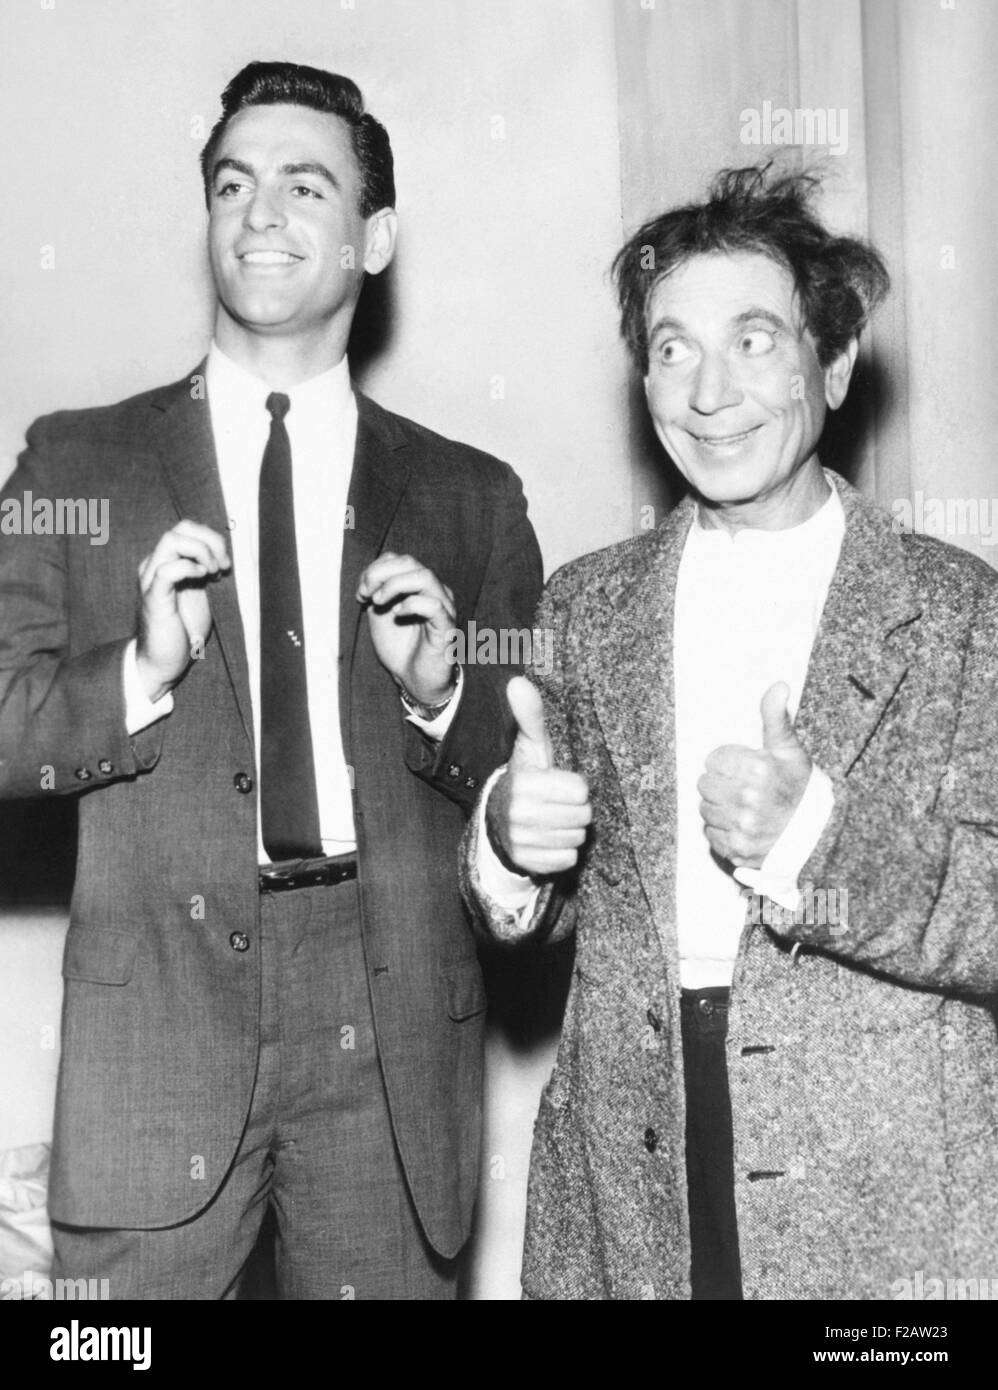 Harpo Marx gives a double thumbs up for his son, Bill. Jan 1961. Harpo and his wife actress Susan Fleming adopted four children: Bill, Alex, Jimmy, and Minnie. In 2008, Bill Marx's published his memoir, SON OF HARPO SPEAKS. (CSU 2015 11 1484) Stock Photo